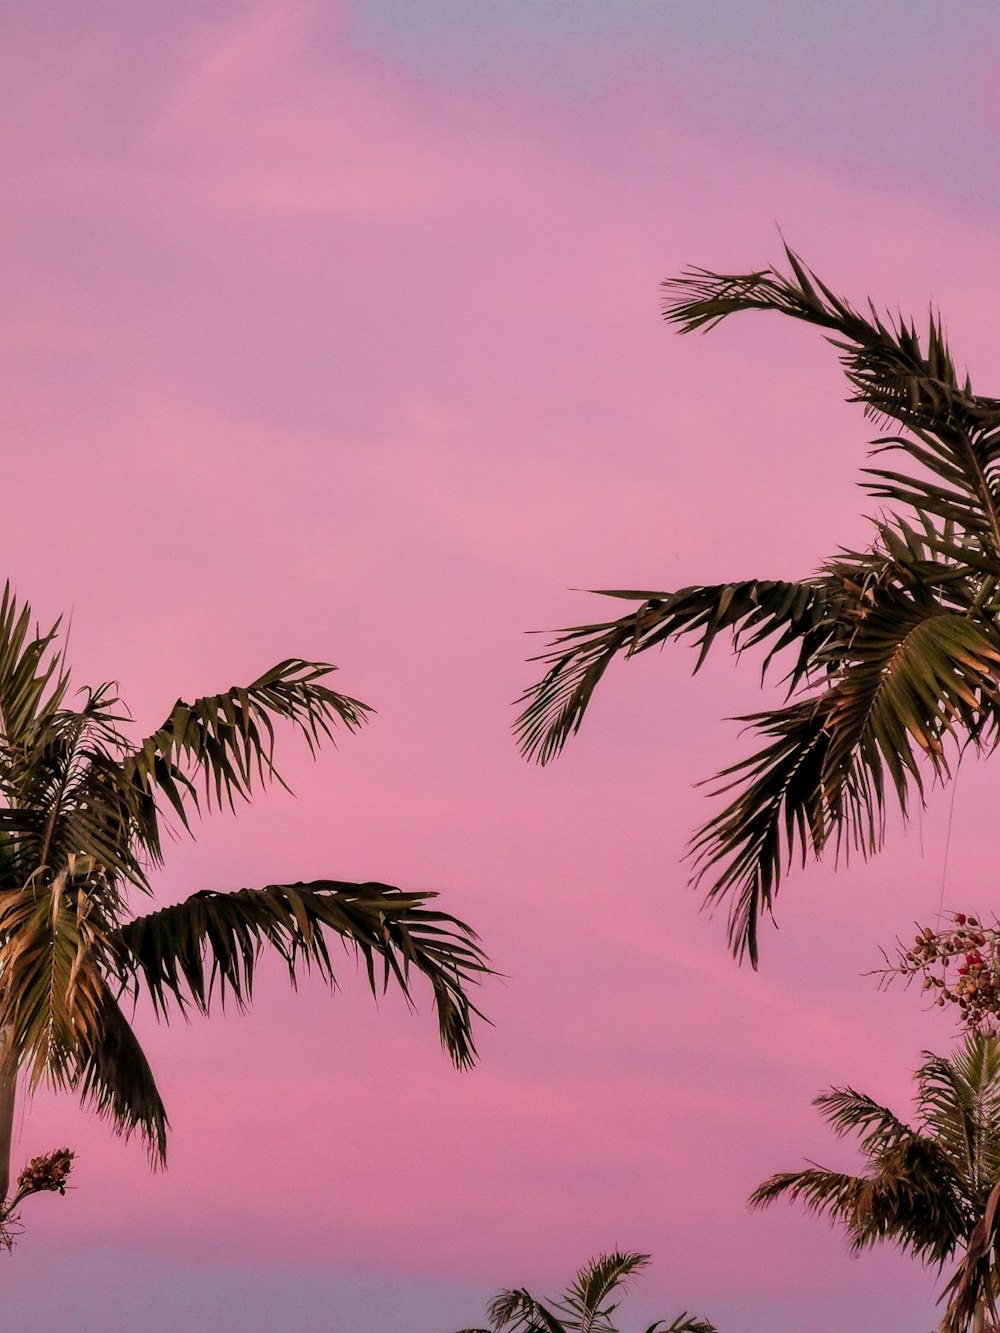 Whitney Bluebell marked 550+ Pink Aesthetic Pictures | Download Free Images on Unsplash